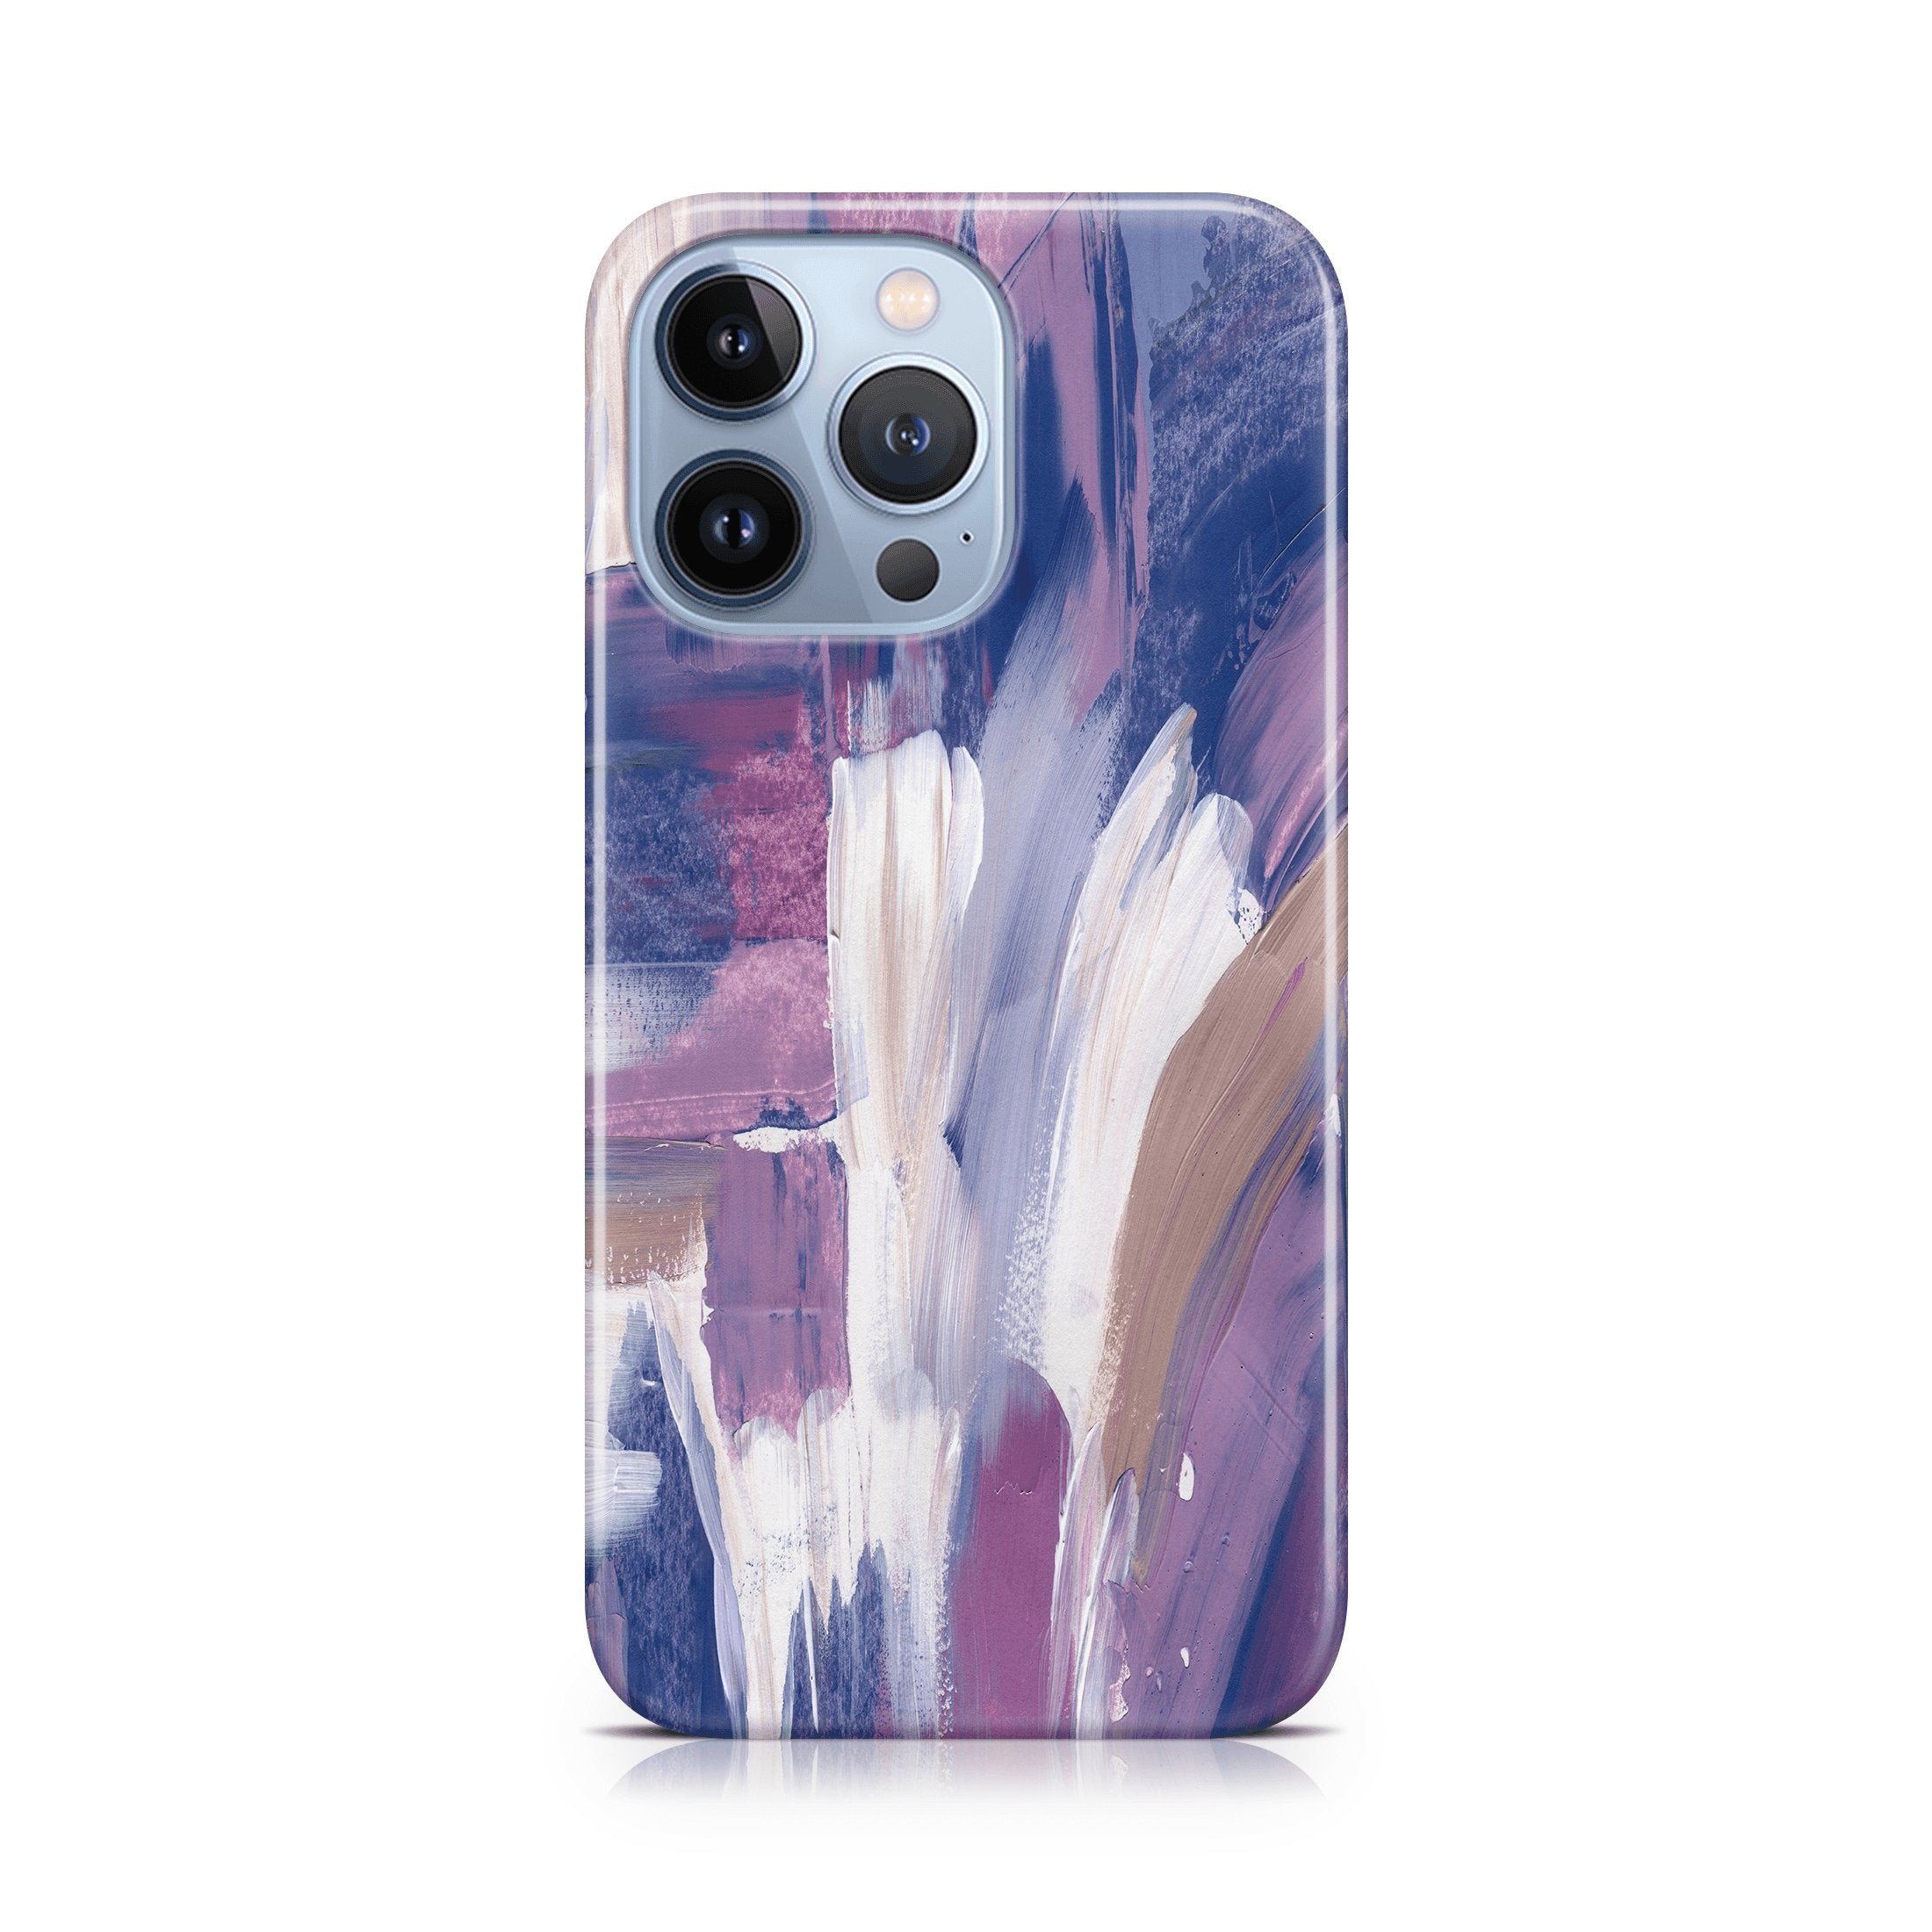 Makeup Blender I - iPhone phone case designs by CaseSwagger